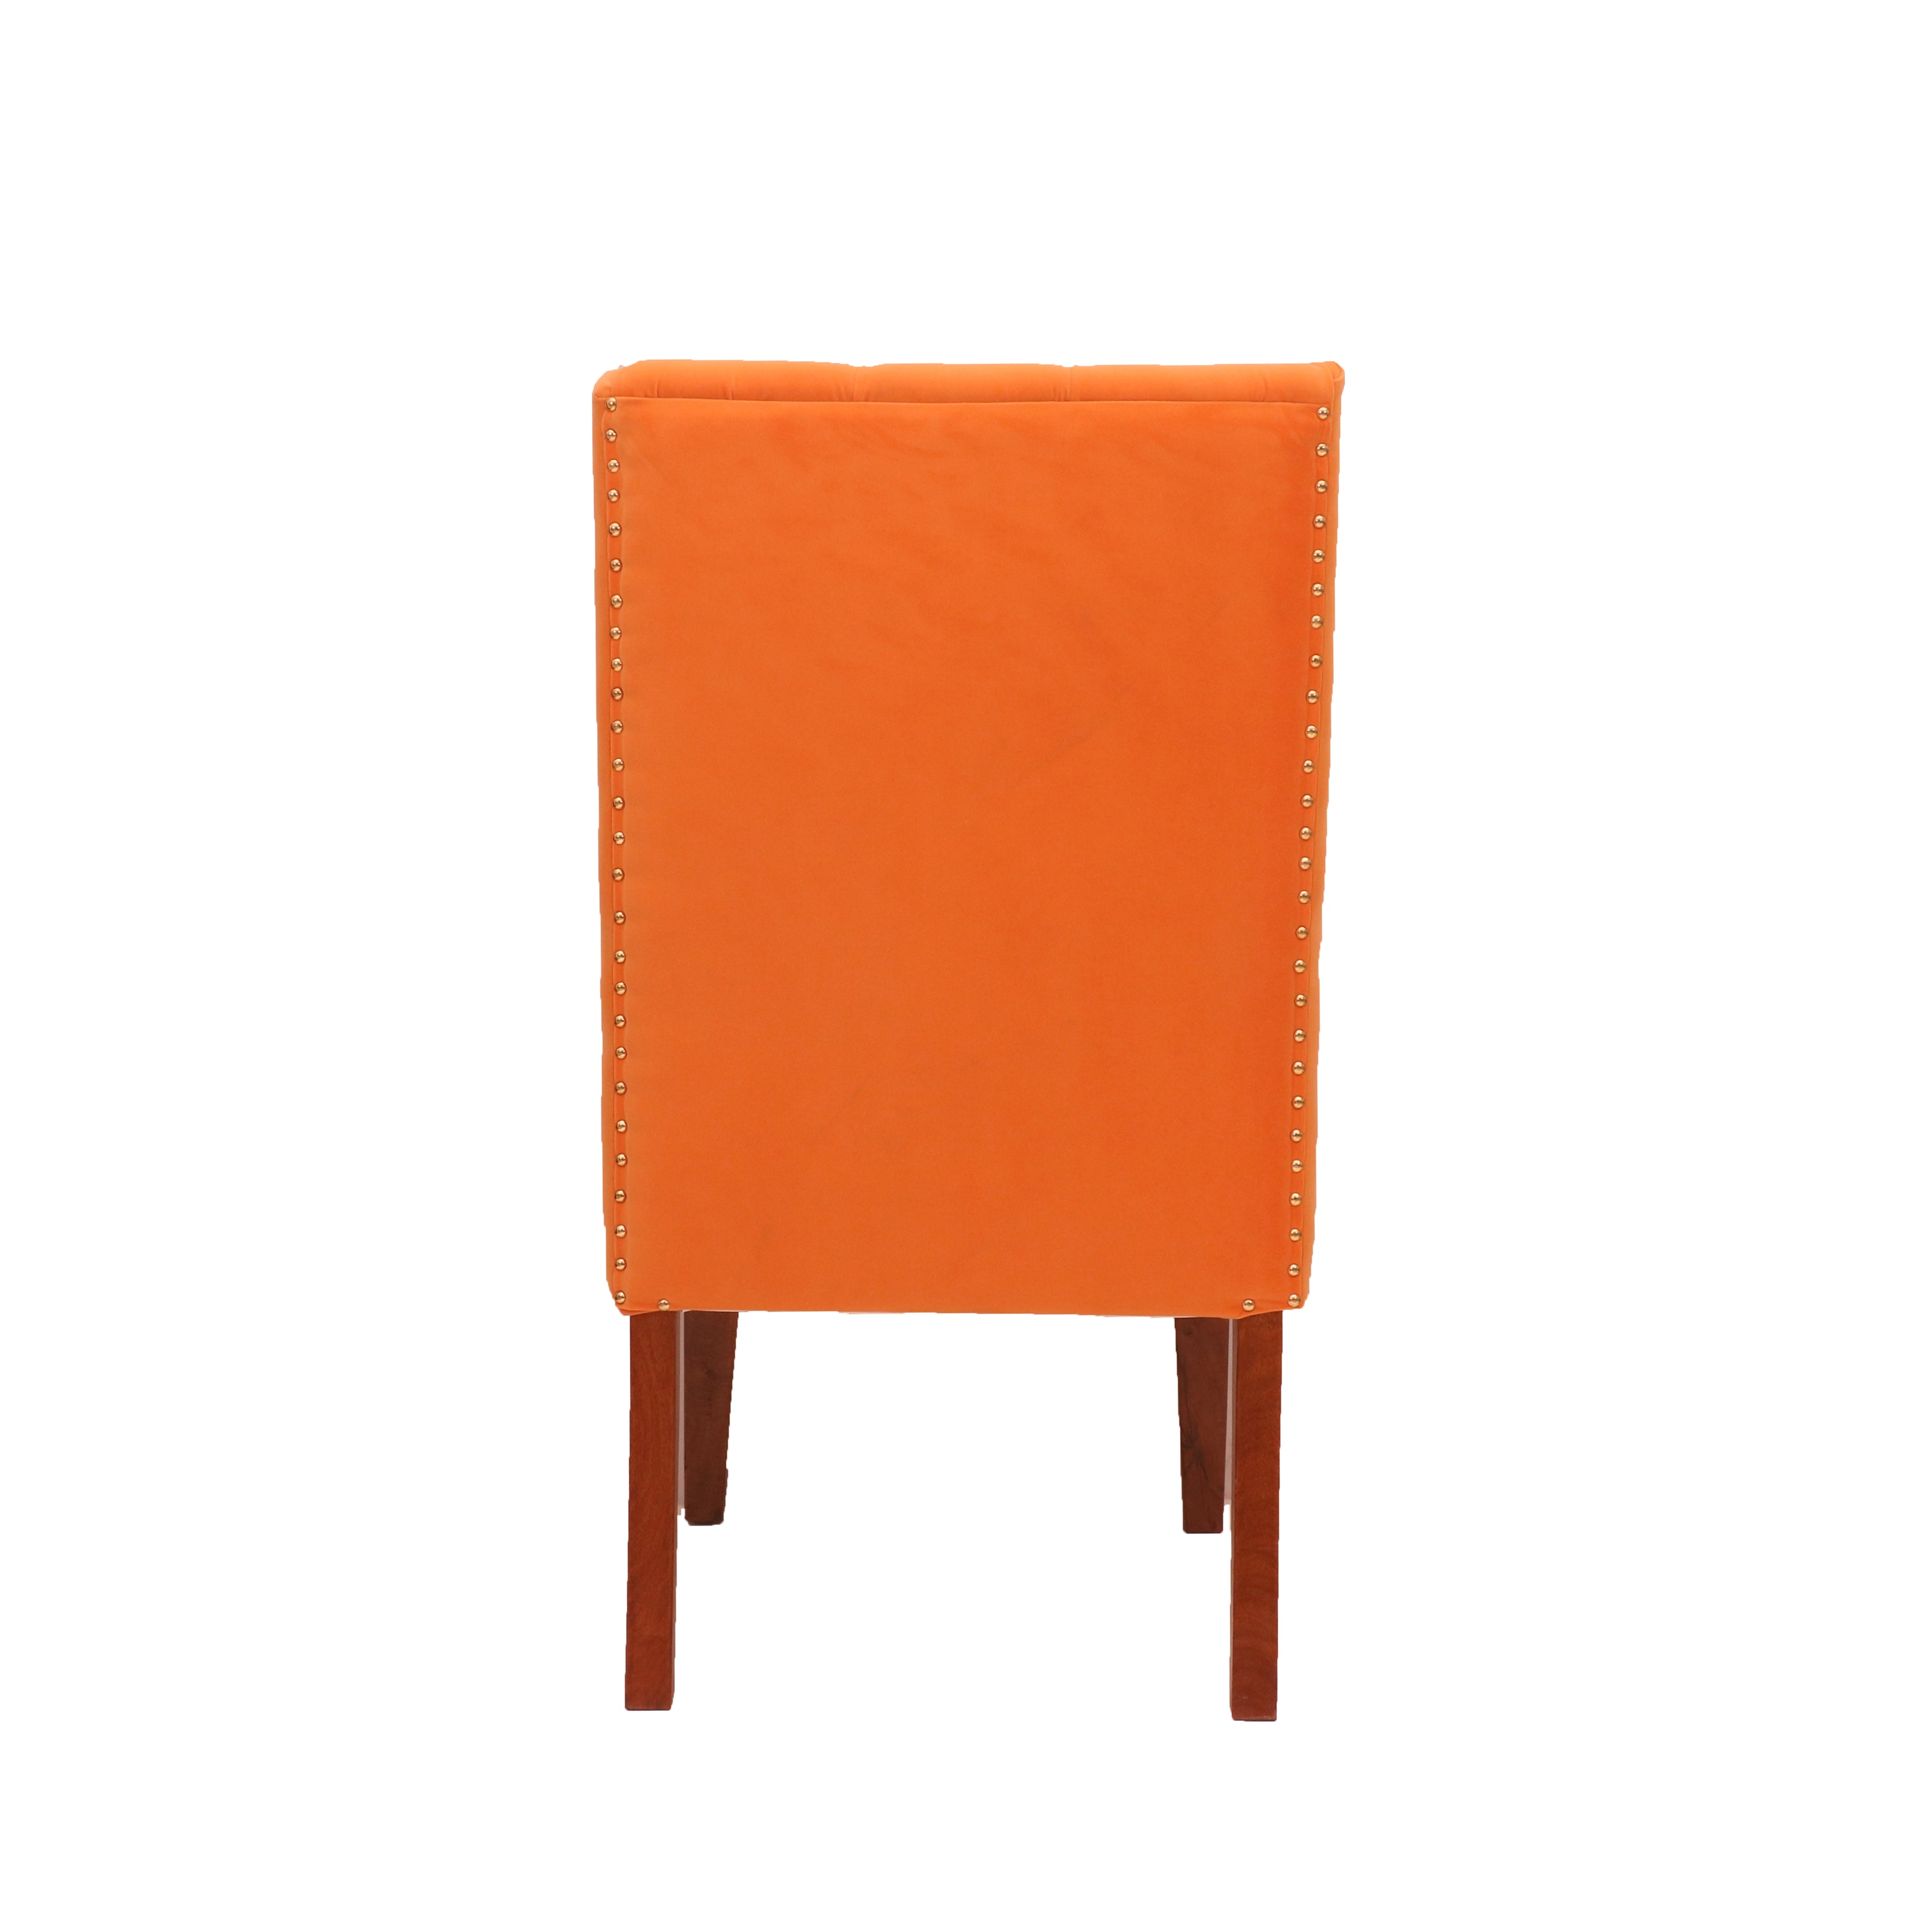 Classic Orange Winged Chair Arm Chair